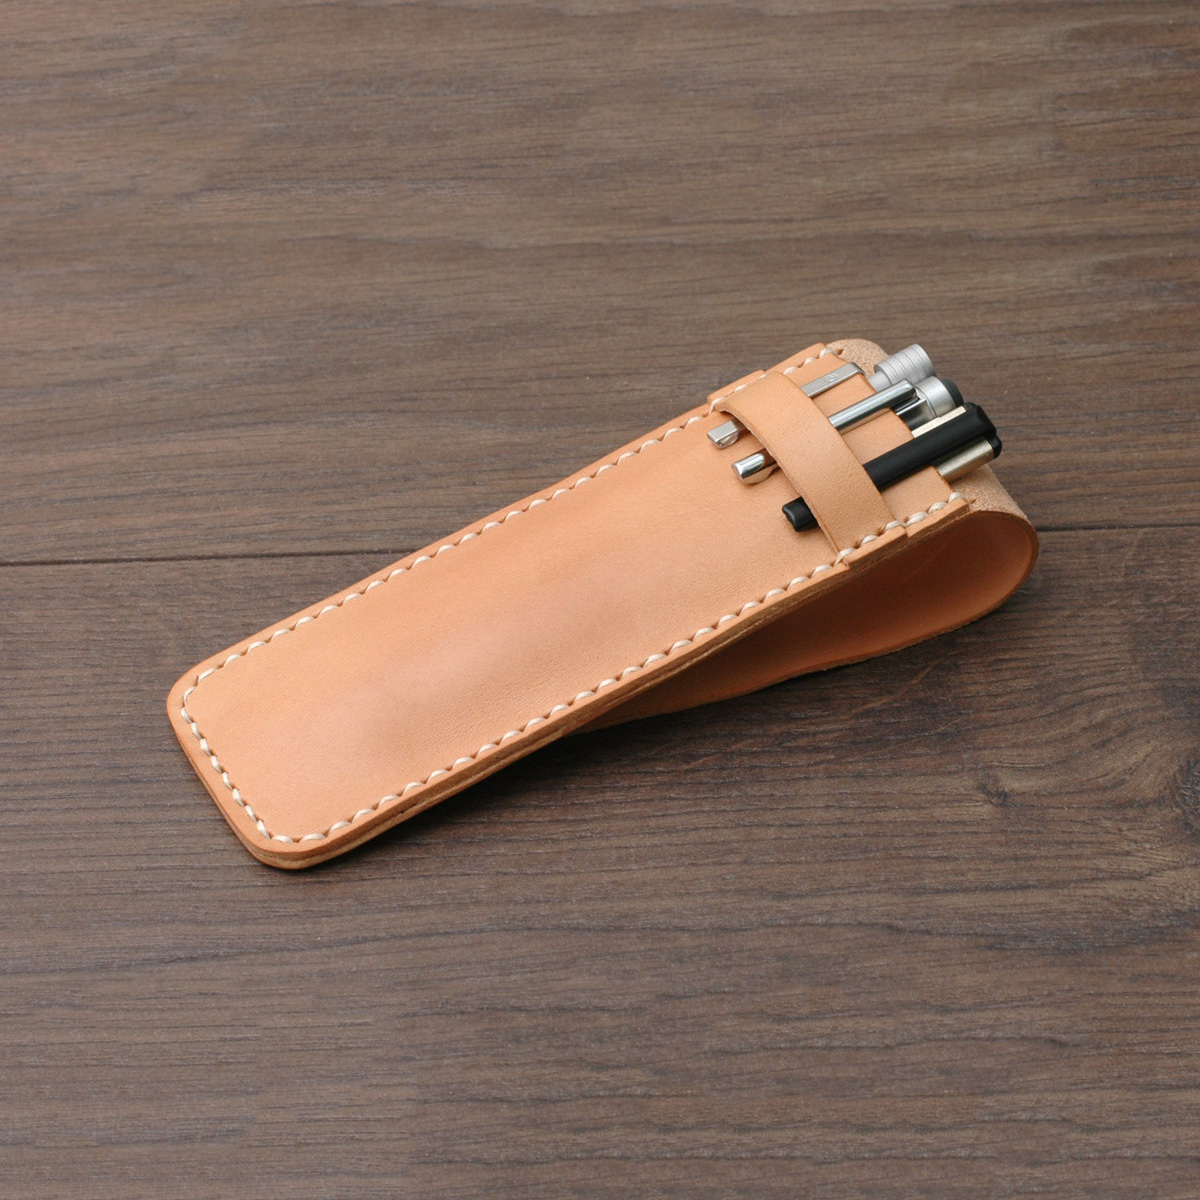 Natural leather goods items for men work gift for business partner